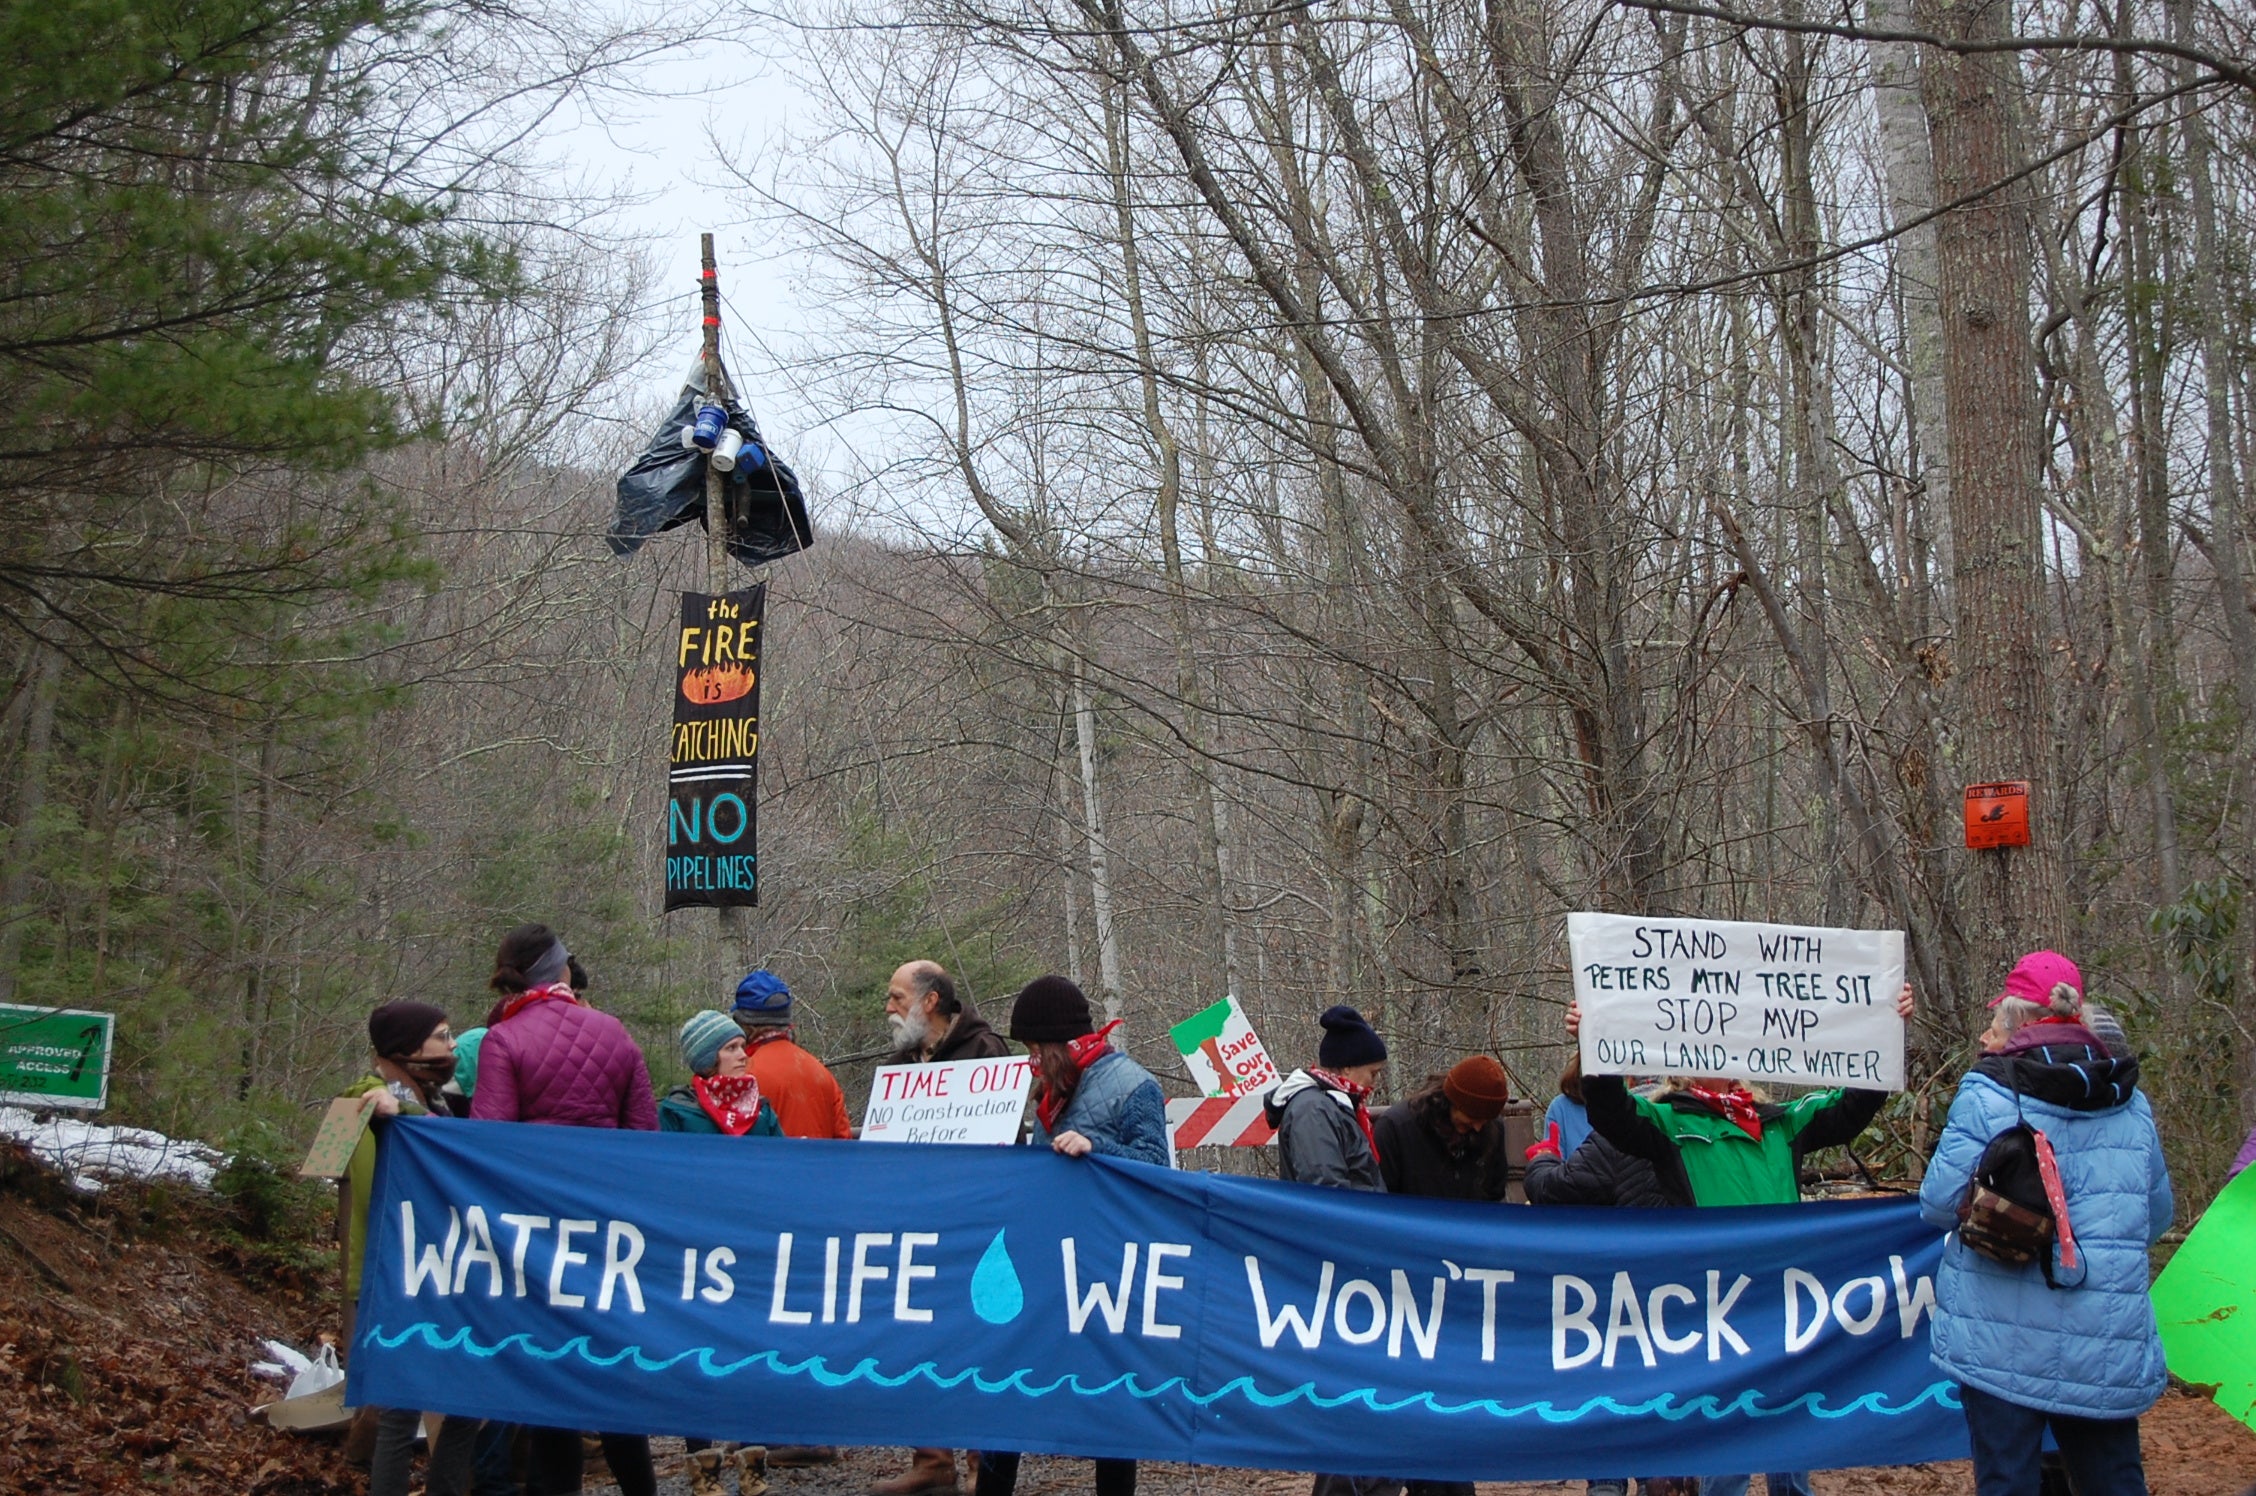 Opponents of the Mountain Valley Pipeline protest near the proposed construction site